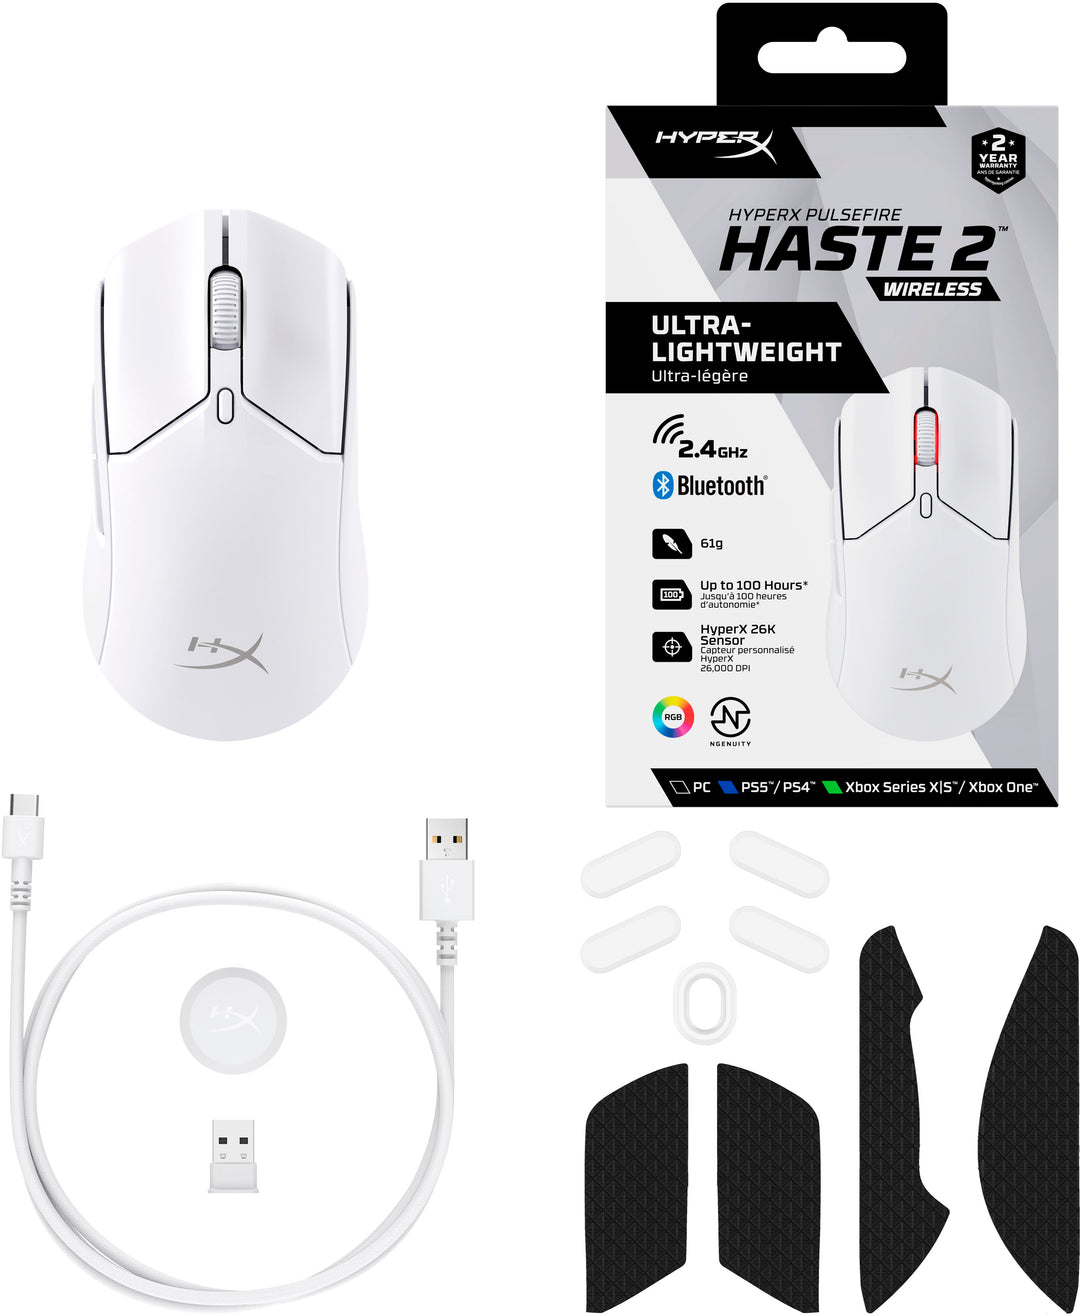 HyperX - Pulsefire Haste 2 Lightweight Wireless Optical Gaming Mouse with RGB Lighting - White_6